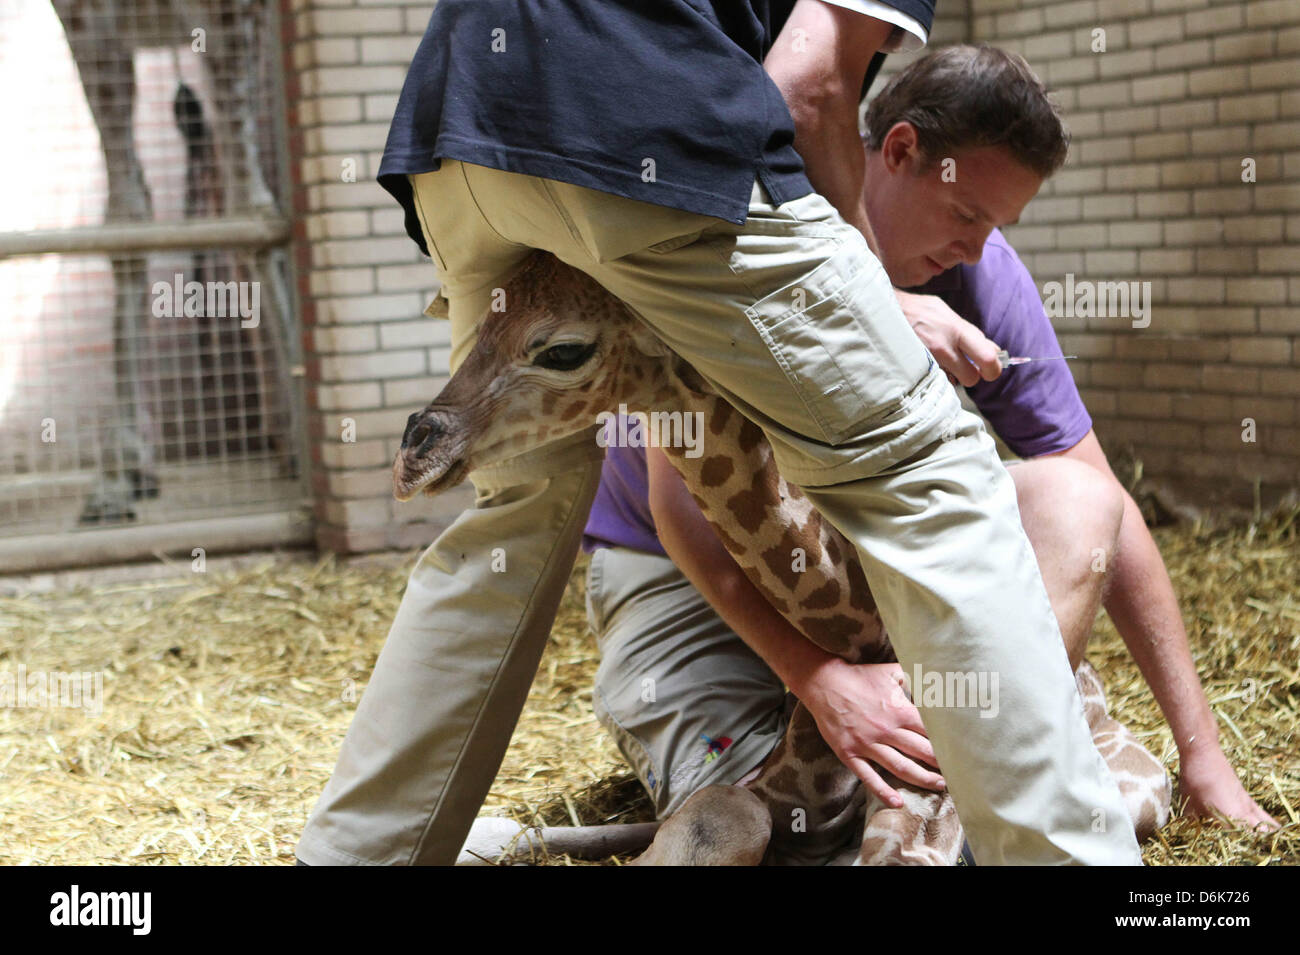 A female baby giraffe gets inoculated after being born at the Zoo in Rhenen, the Netherlands, 10 August 2012. Photo: VidiPhoto - NETHERLANDS OUT Stock Photo